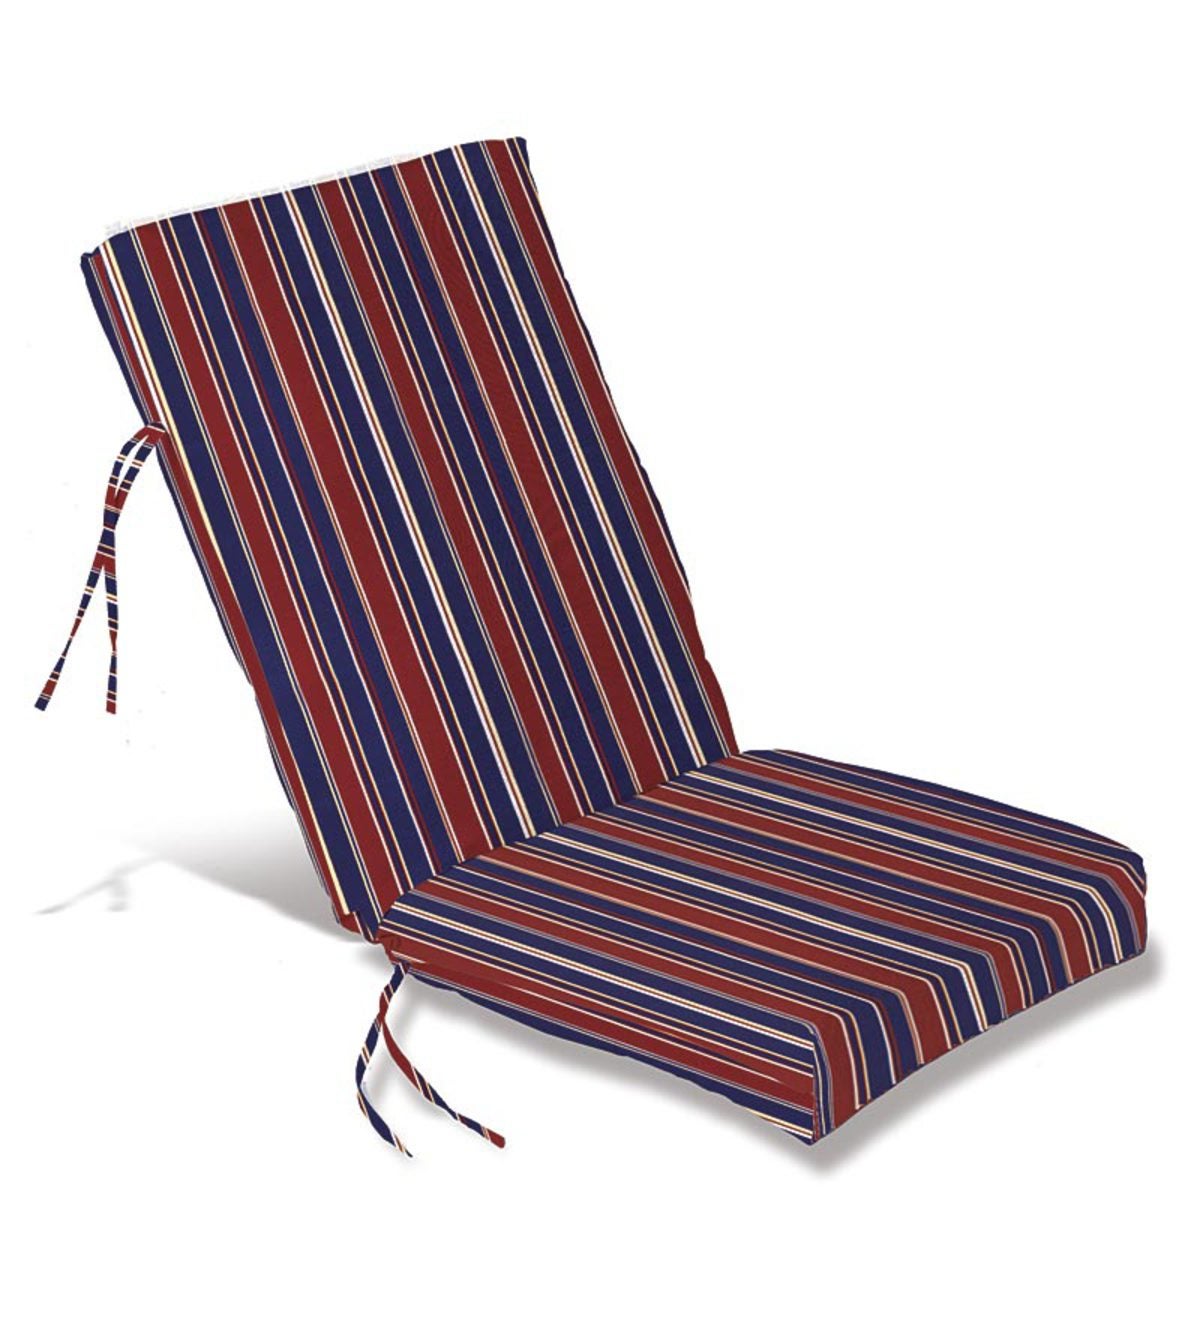 Sale! Polyester Classic High Back Chair Cushion With Ties, 46”x 20”with hinge 19”from bottom - Americana Stripe